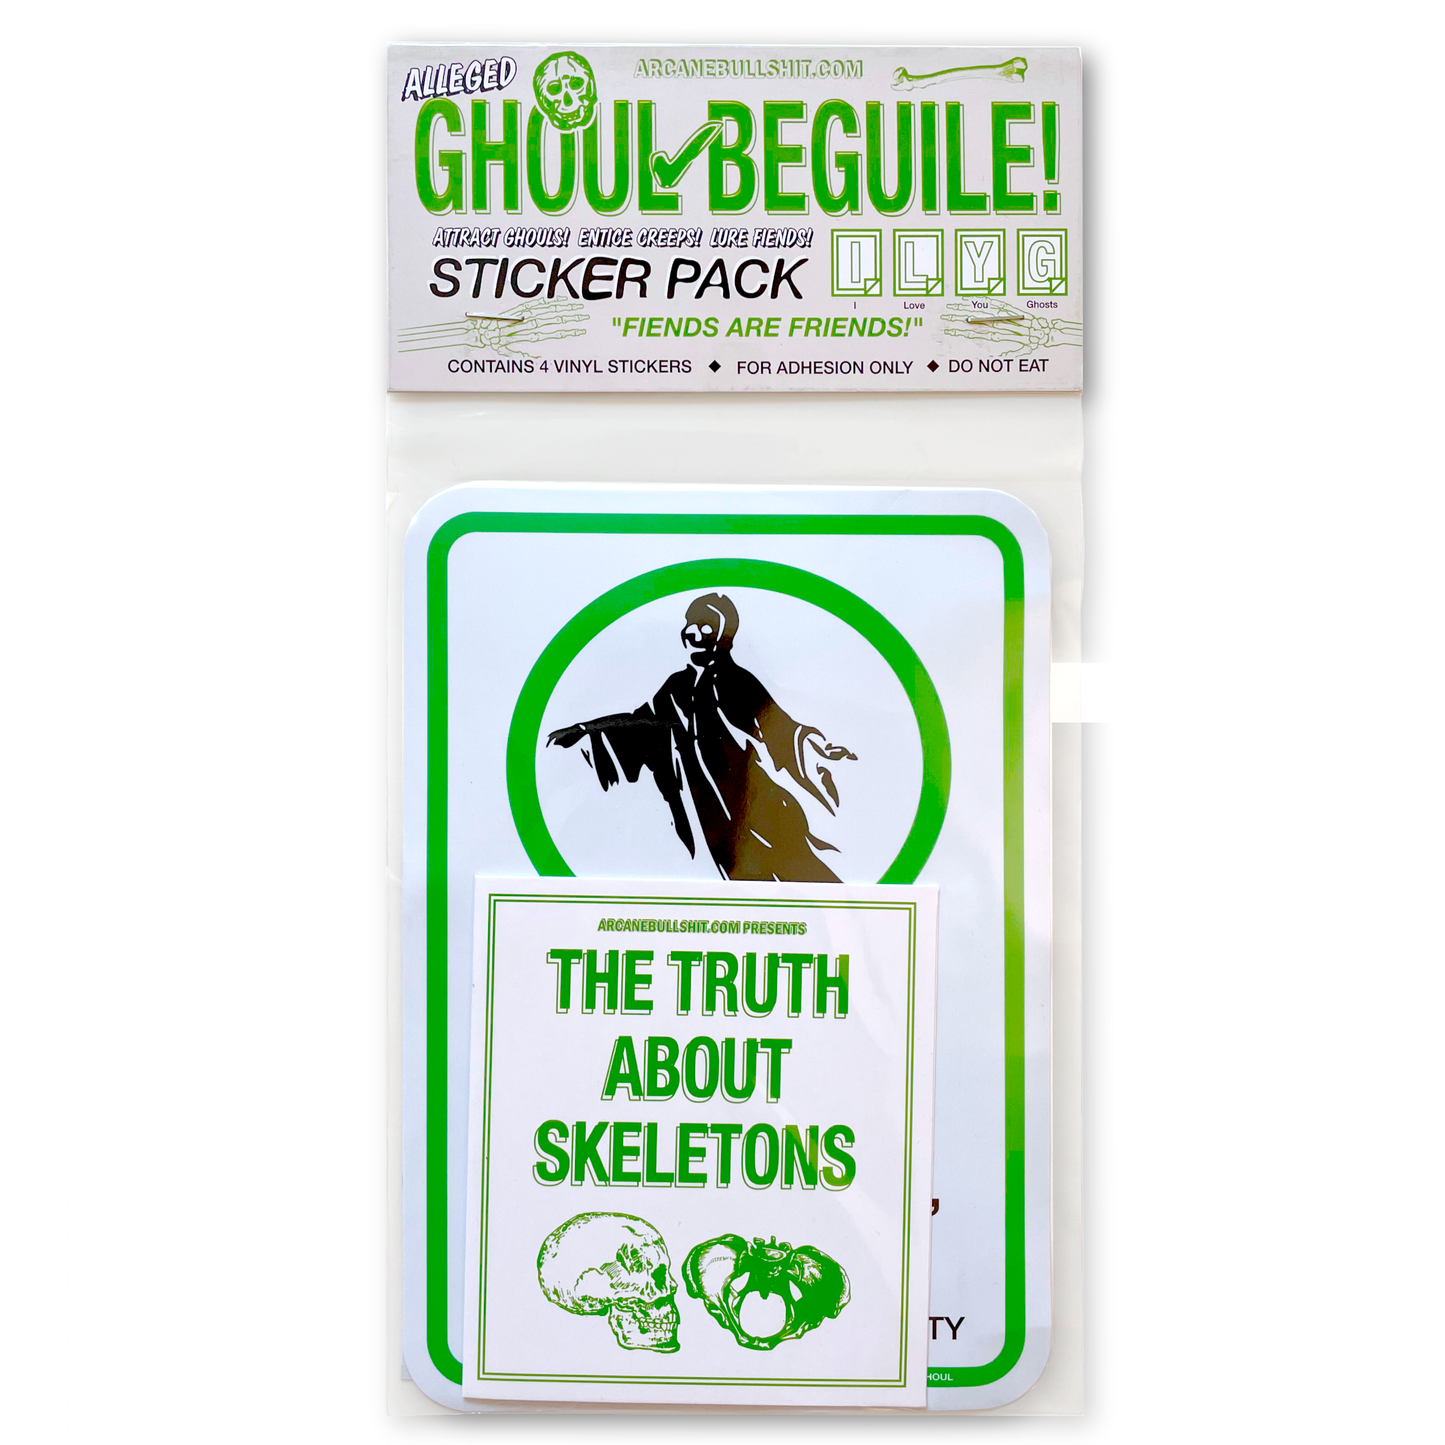 "Ghoul Beguile" Sticker Pack